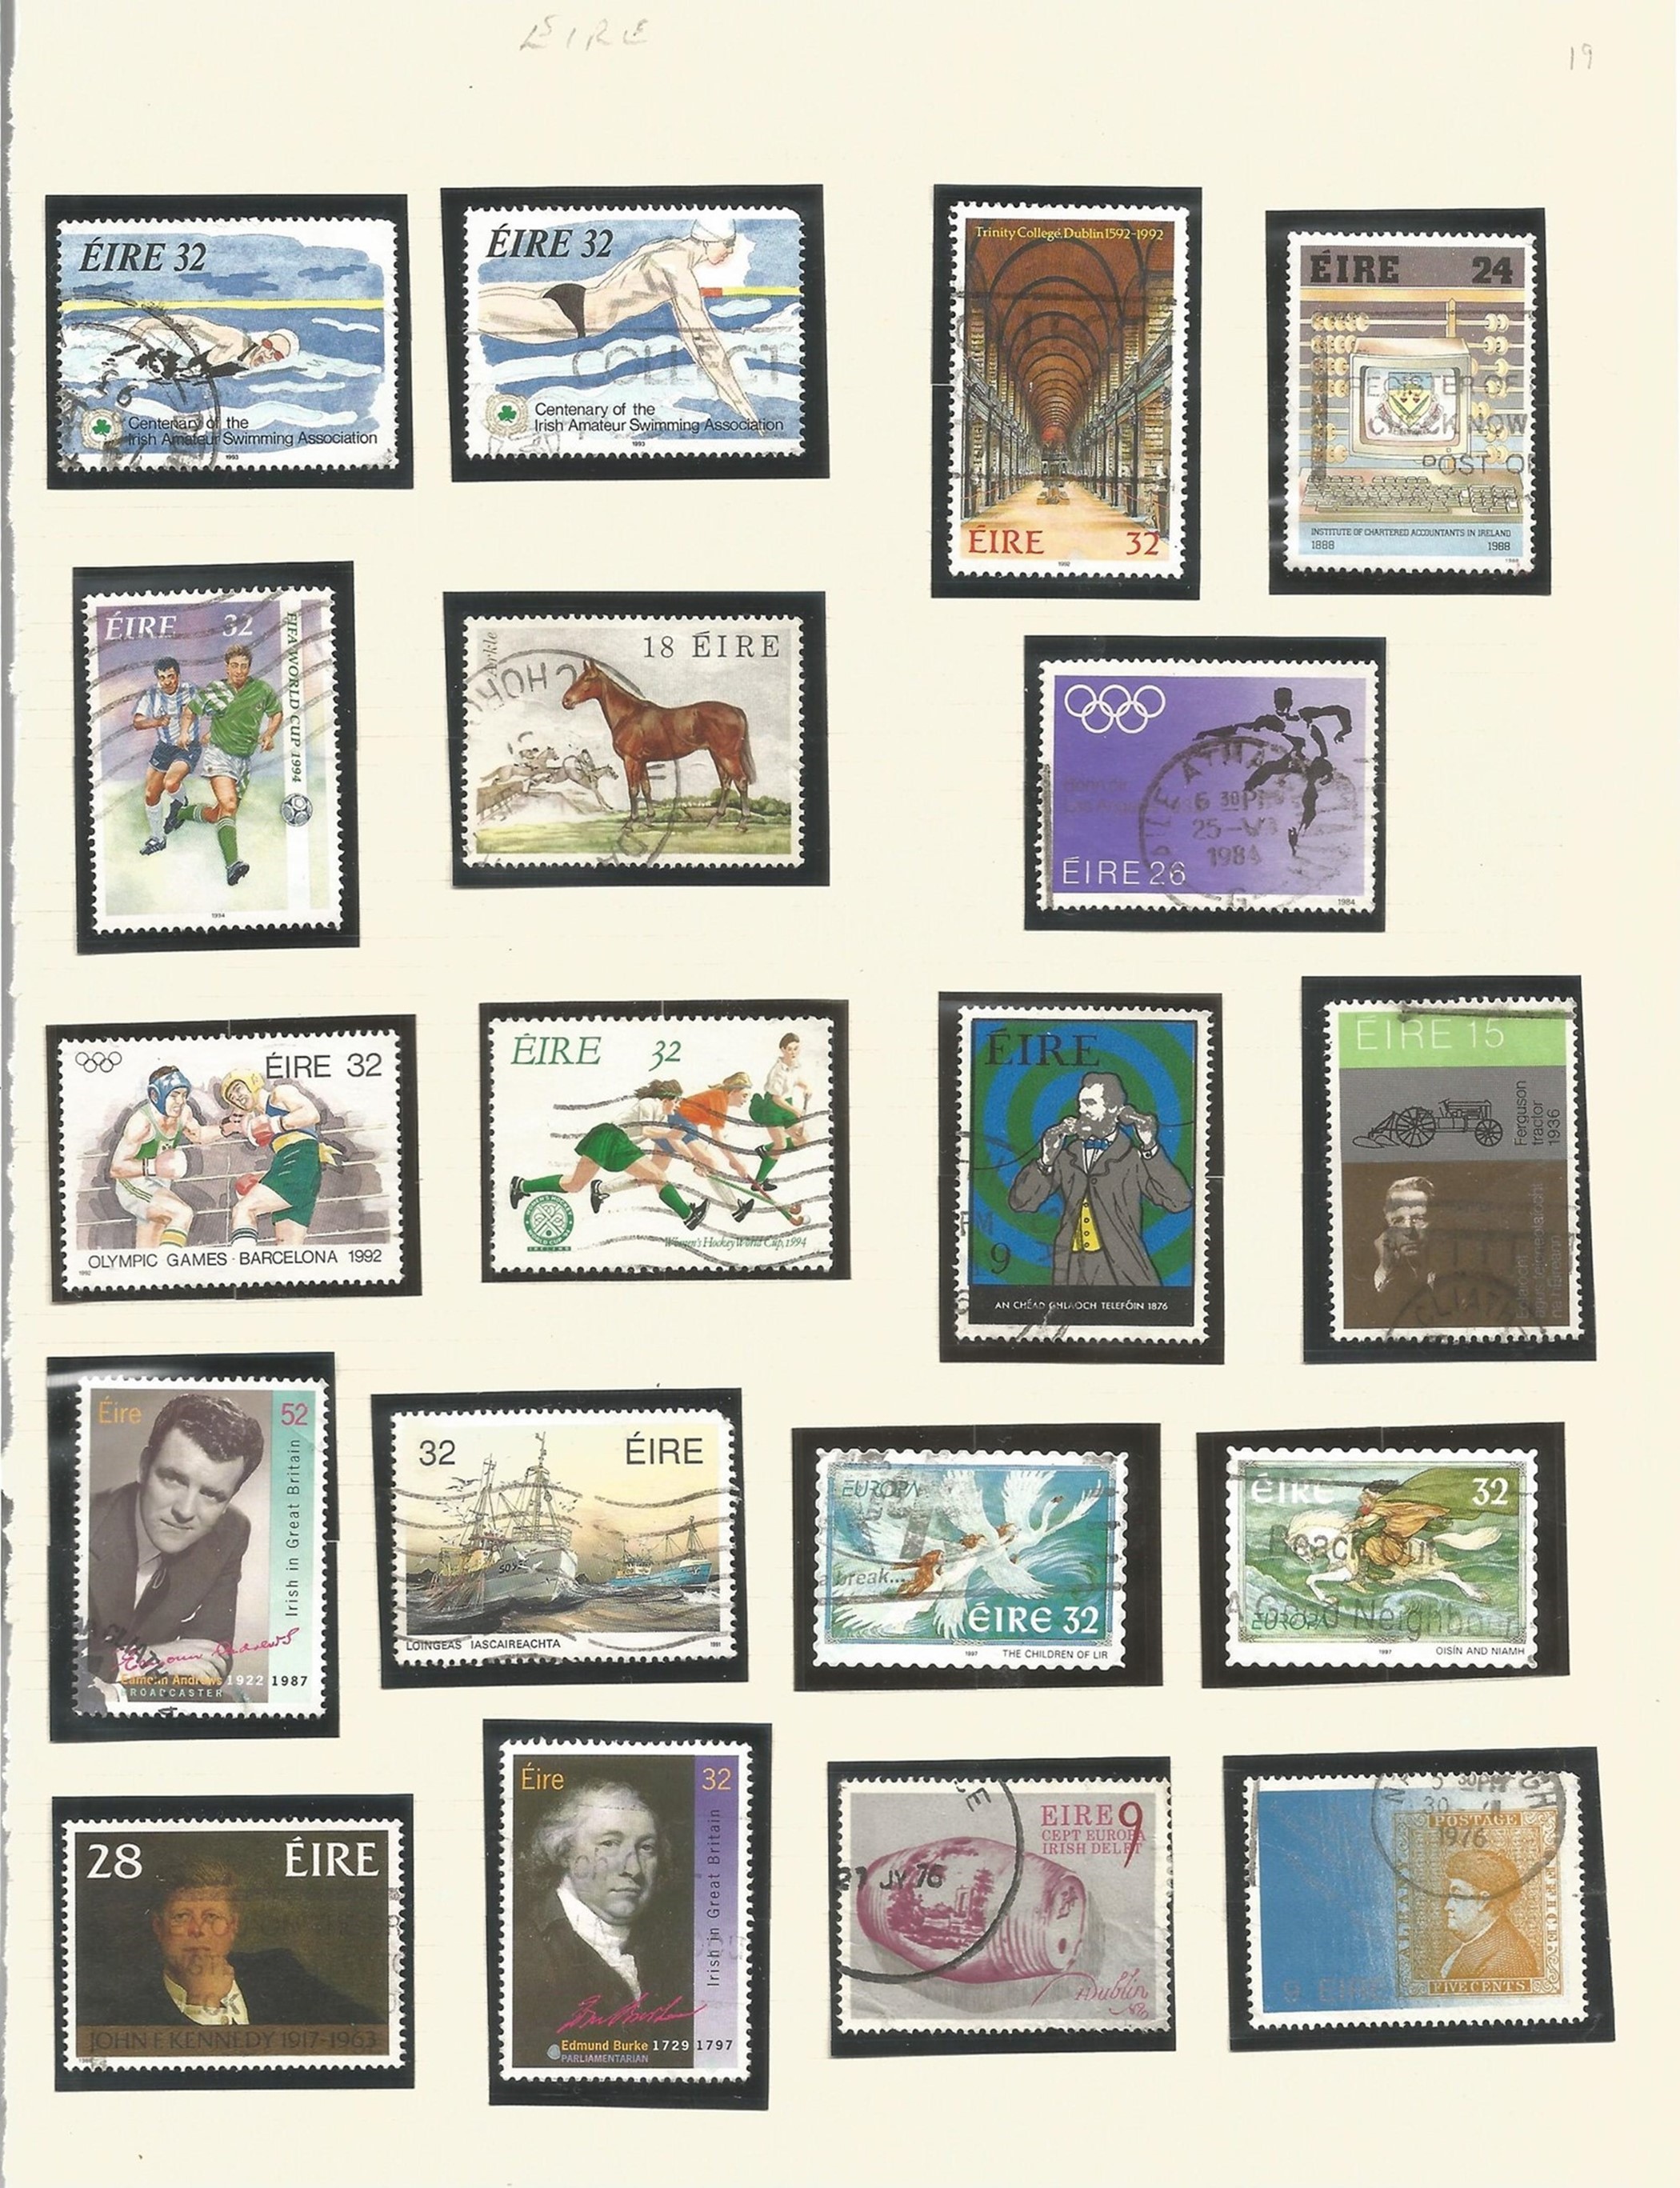 Ireland Stamps approx 800 used Eire Stamps on various loose Album pages Includes some with Gaelic - Image 3 of 3